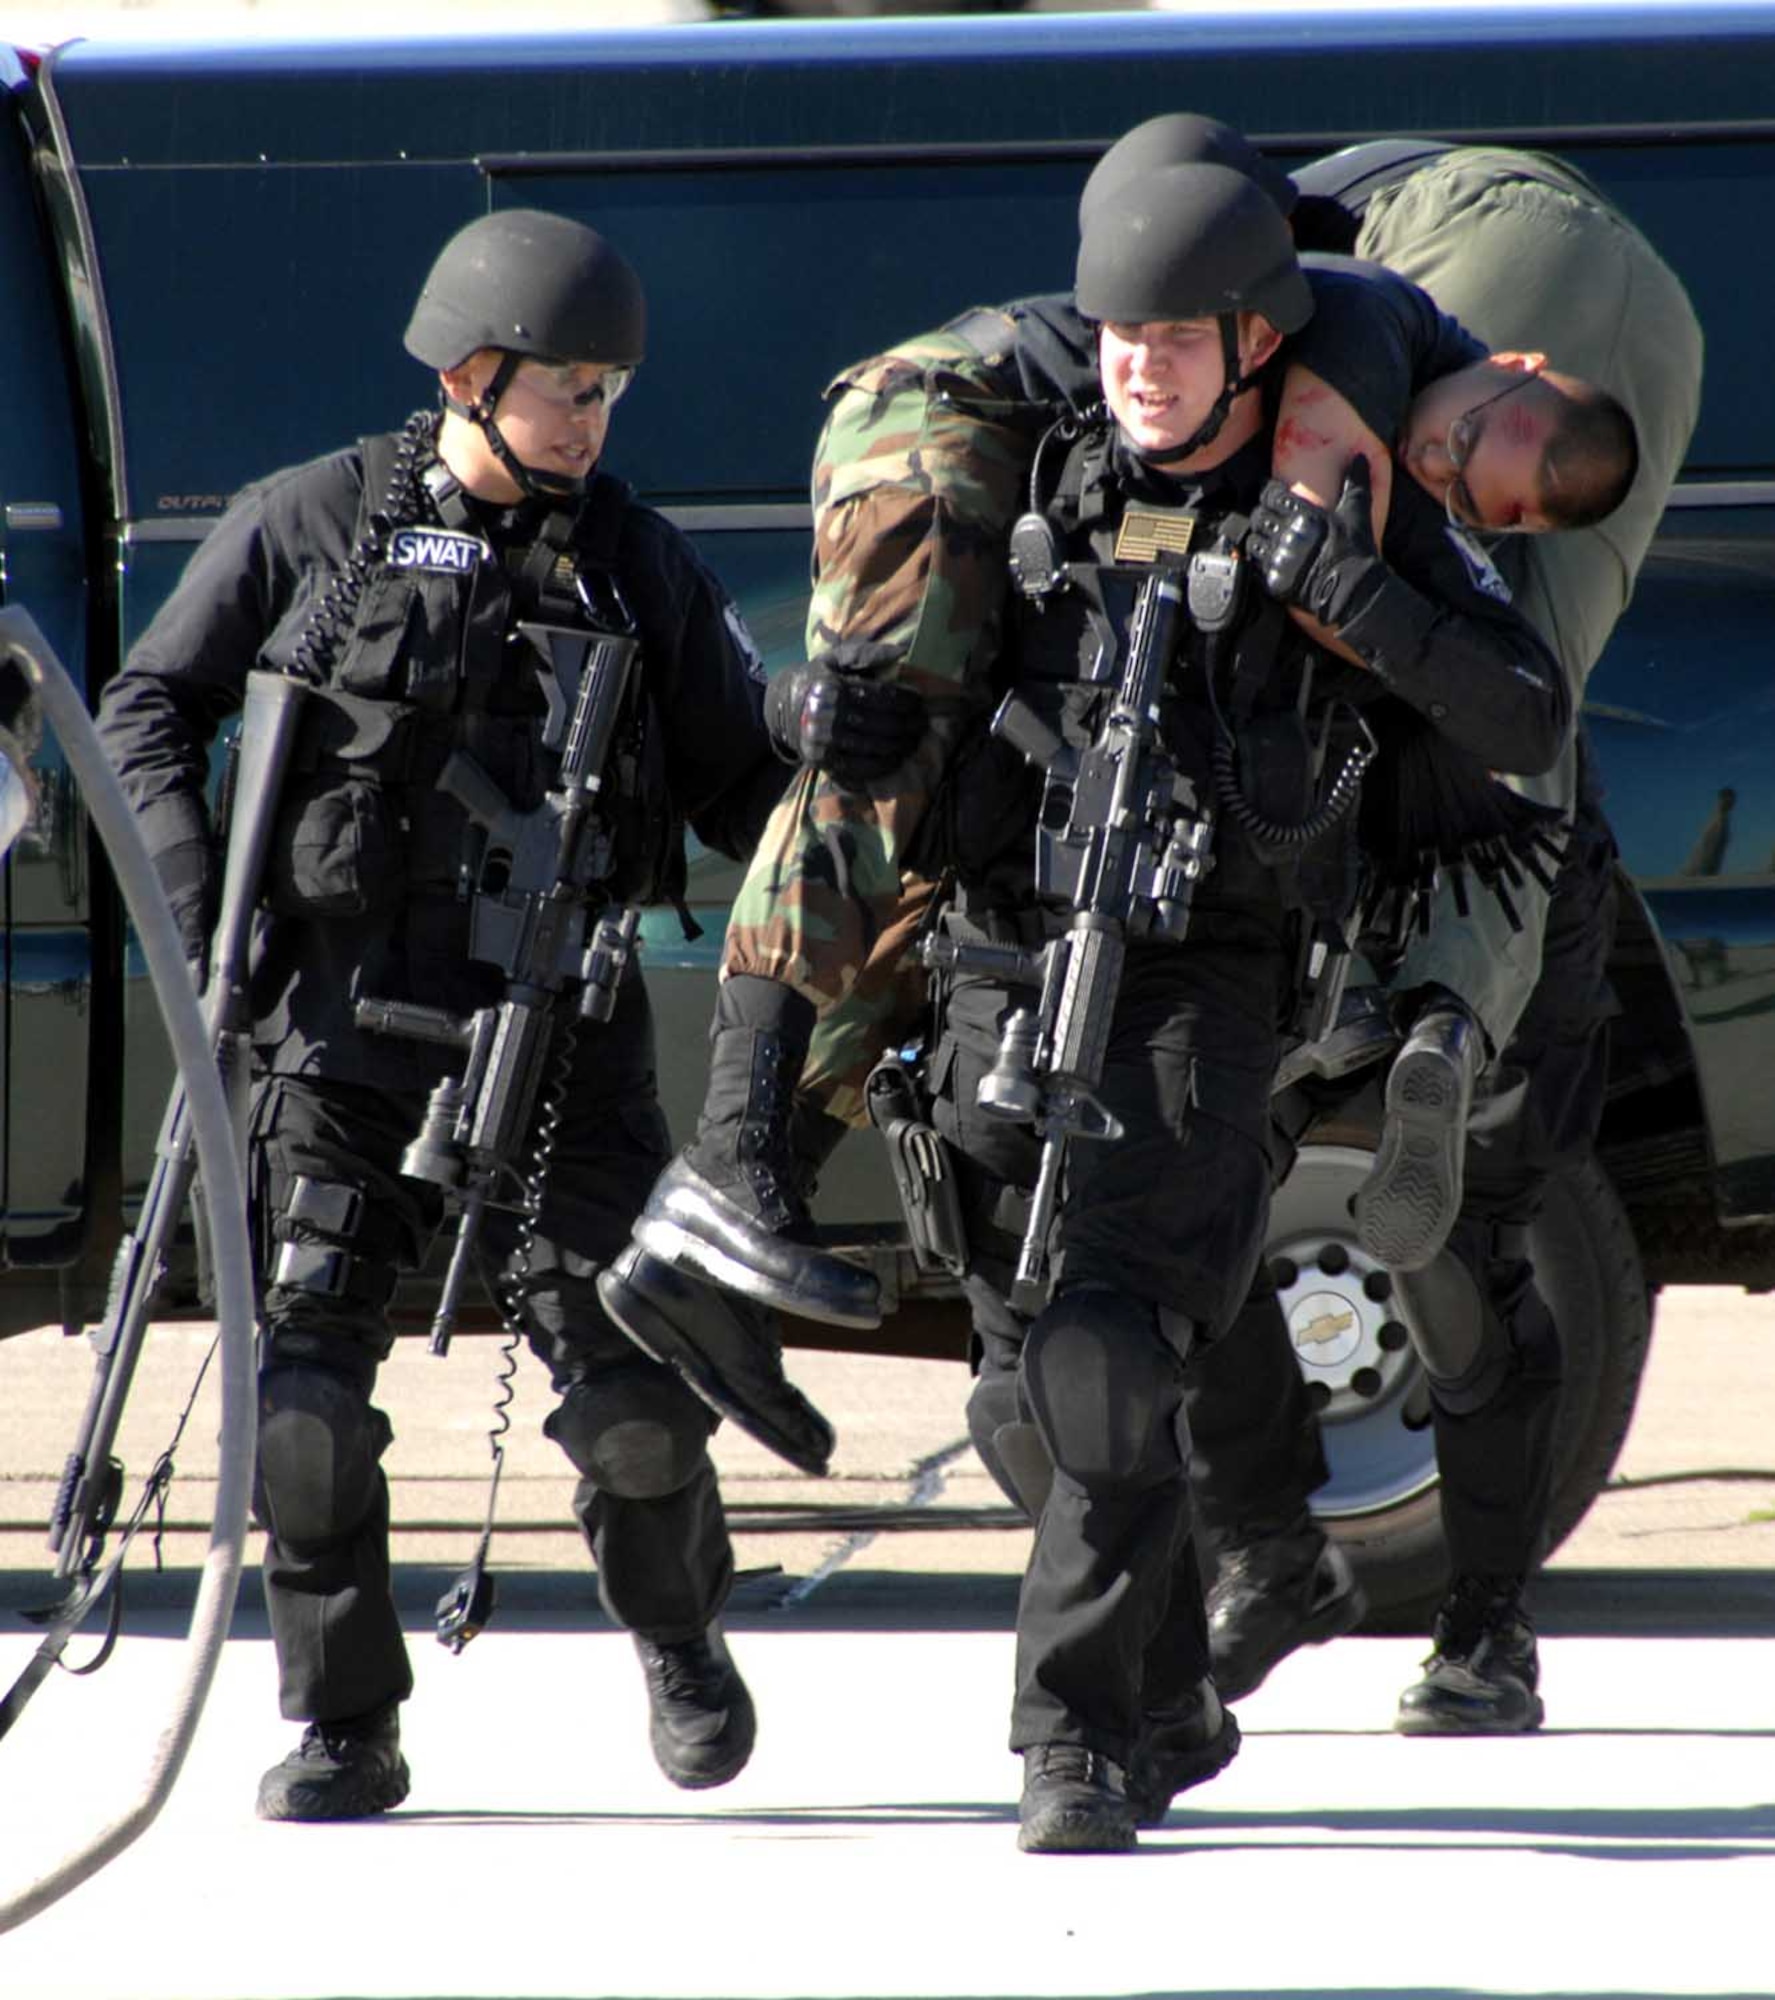 Staff Sgt. David Lopez, SWAT team leader (left) assists Staff Sgt. William McCoy, SWAT team member, carry Airman 1st Class Emmanuel Jose, 860th Aircraft Maintenance Squadron, from the scene of the attempted hi-jacking. The incident was part of the Home Station Attack Response Exercise that tested the abilities of servicemembers and the capabilities of Travis and the Solano County community in the event of an attack. (U.S. Air Force photo)